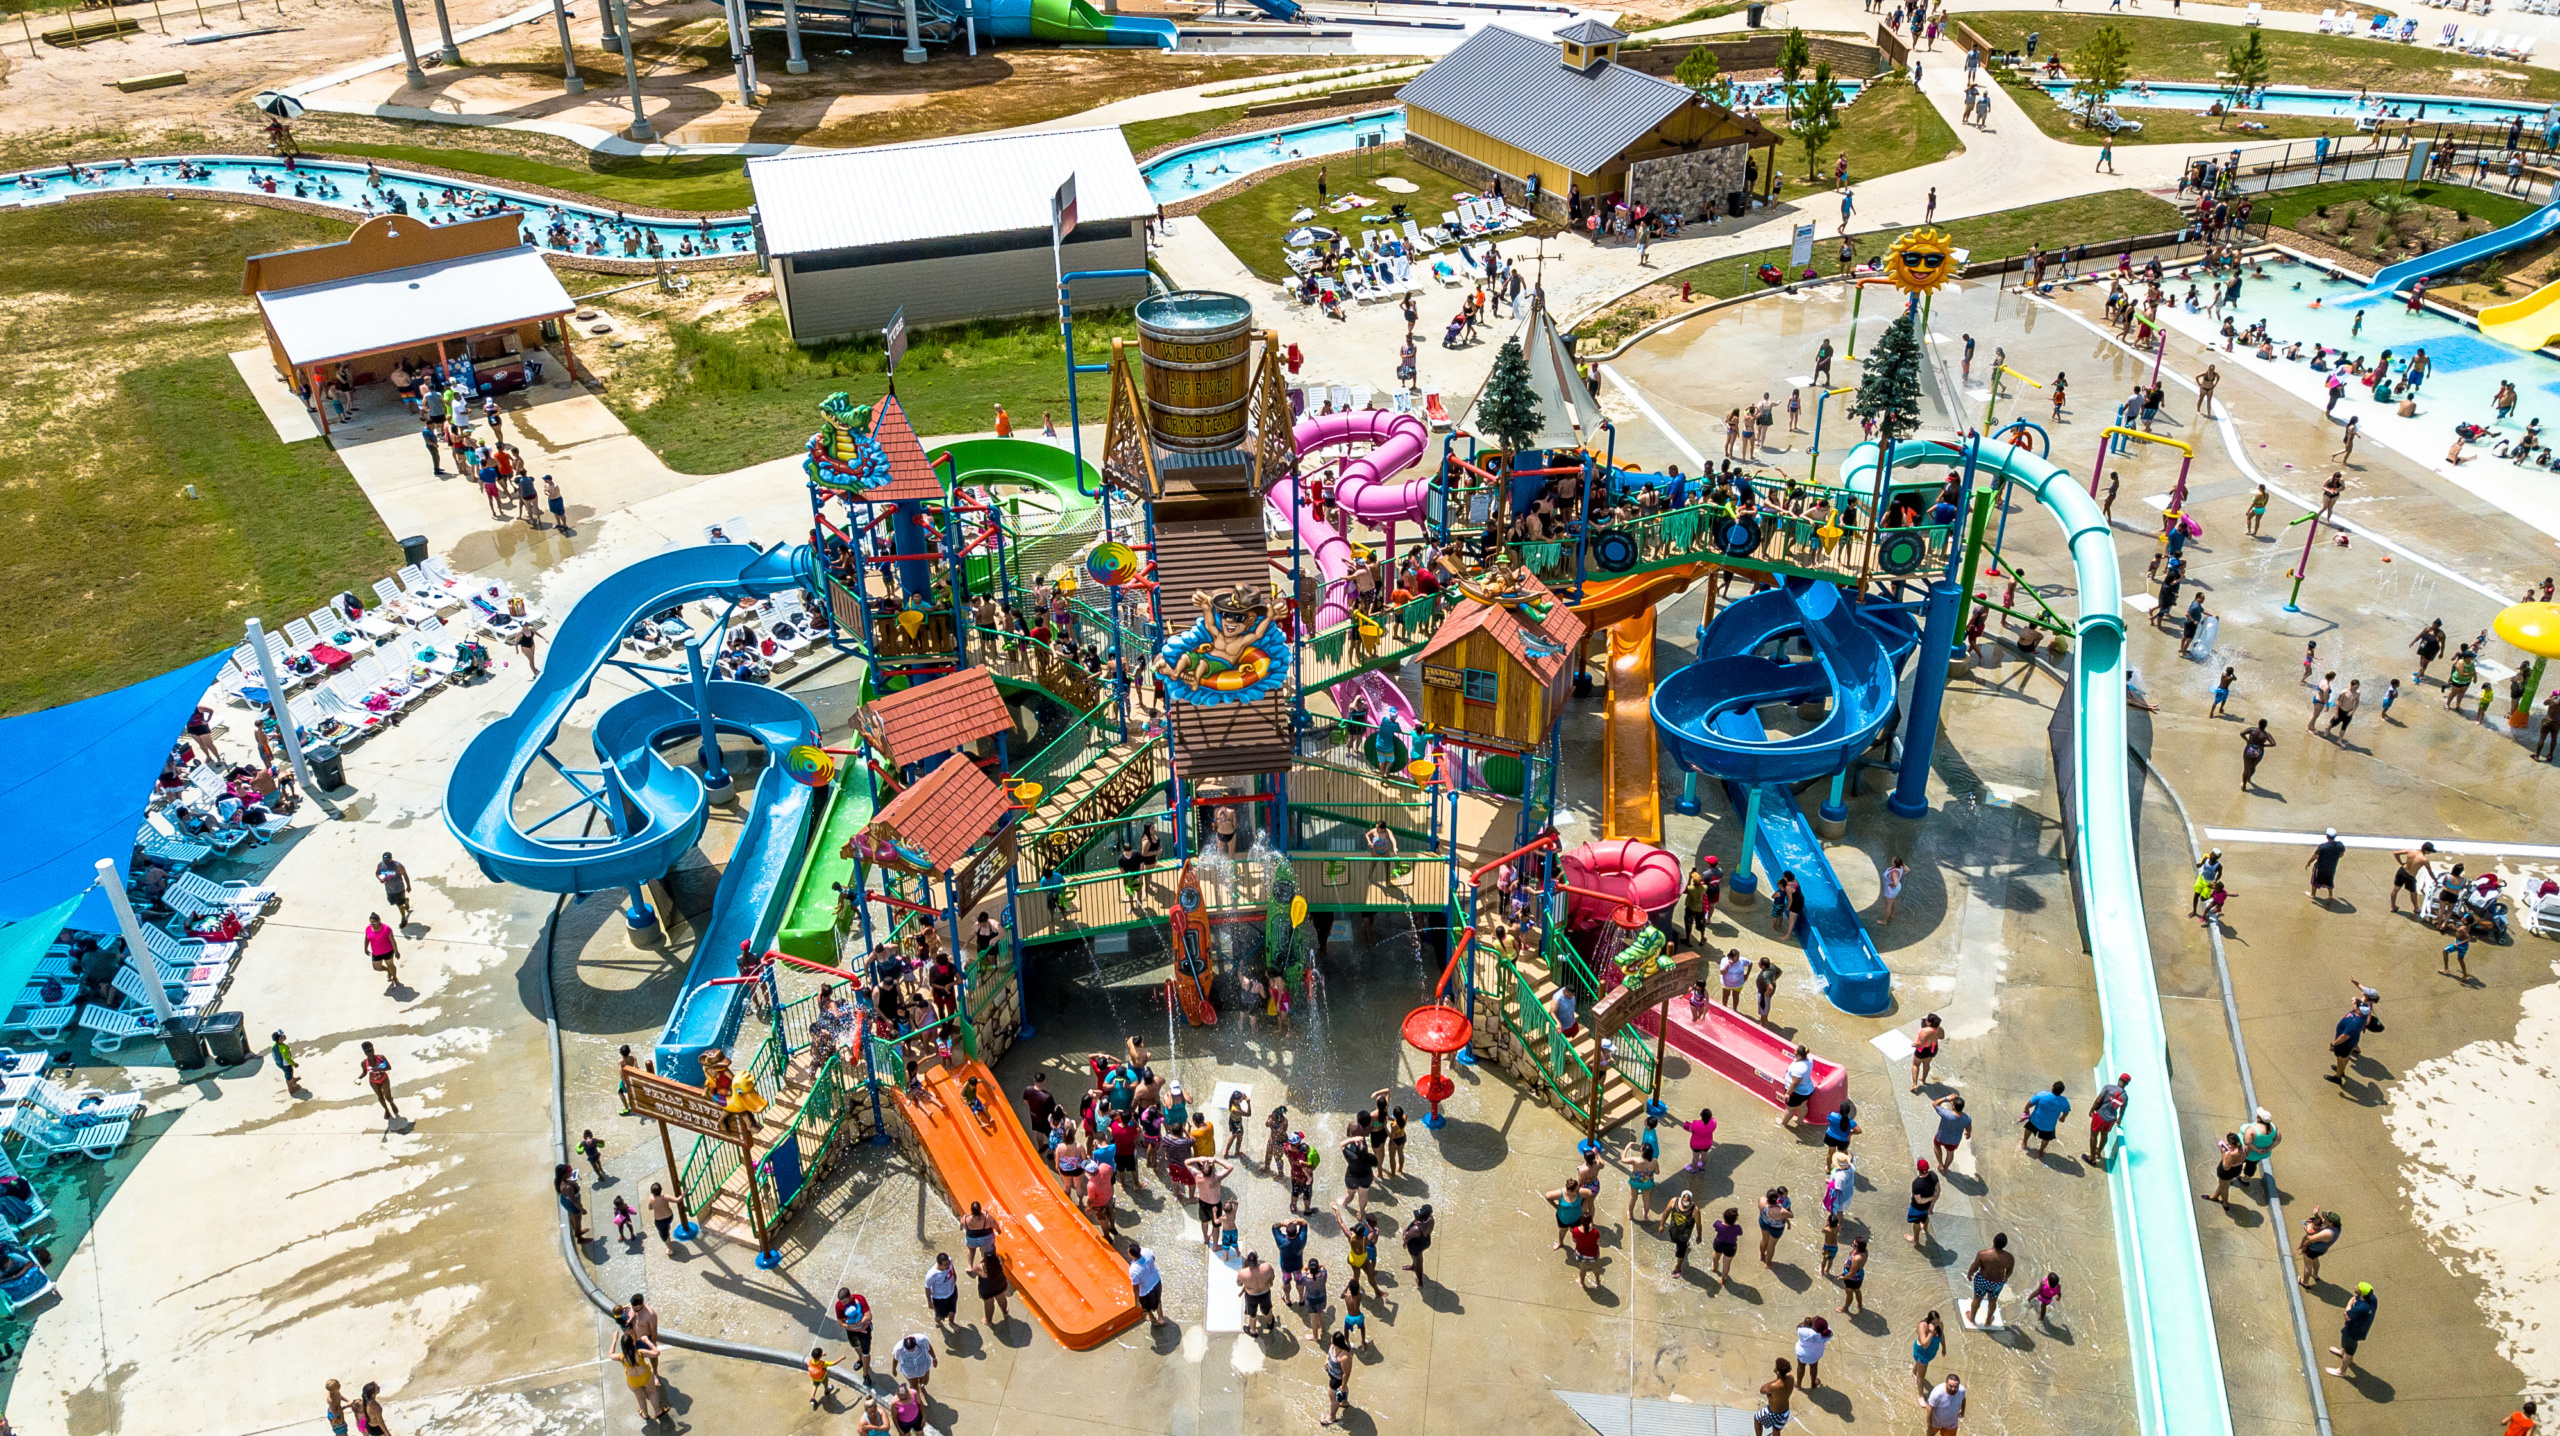 Make a splash in New Braunfels with water parks, river floats, and more -  CultureMap Houston